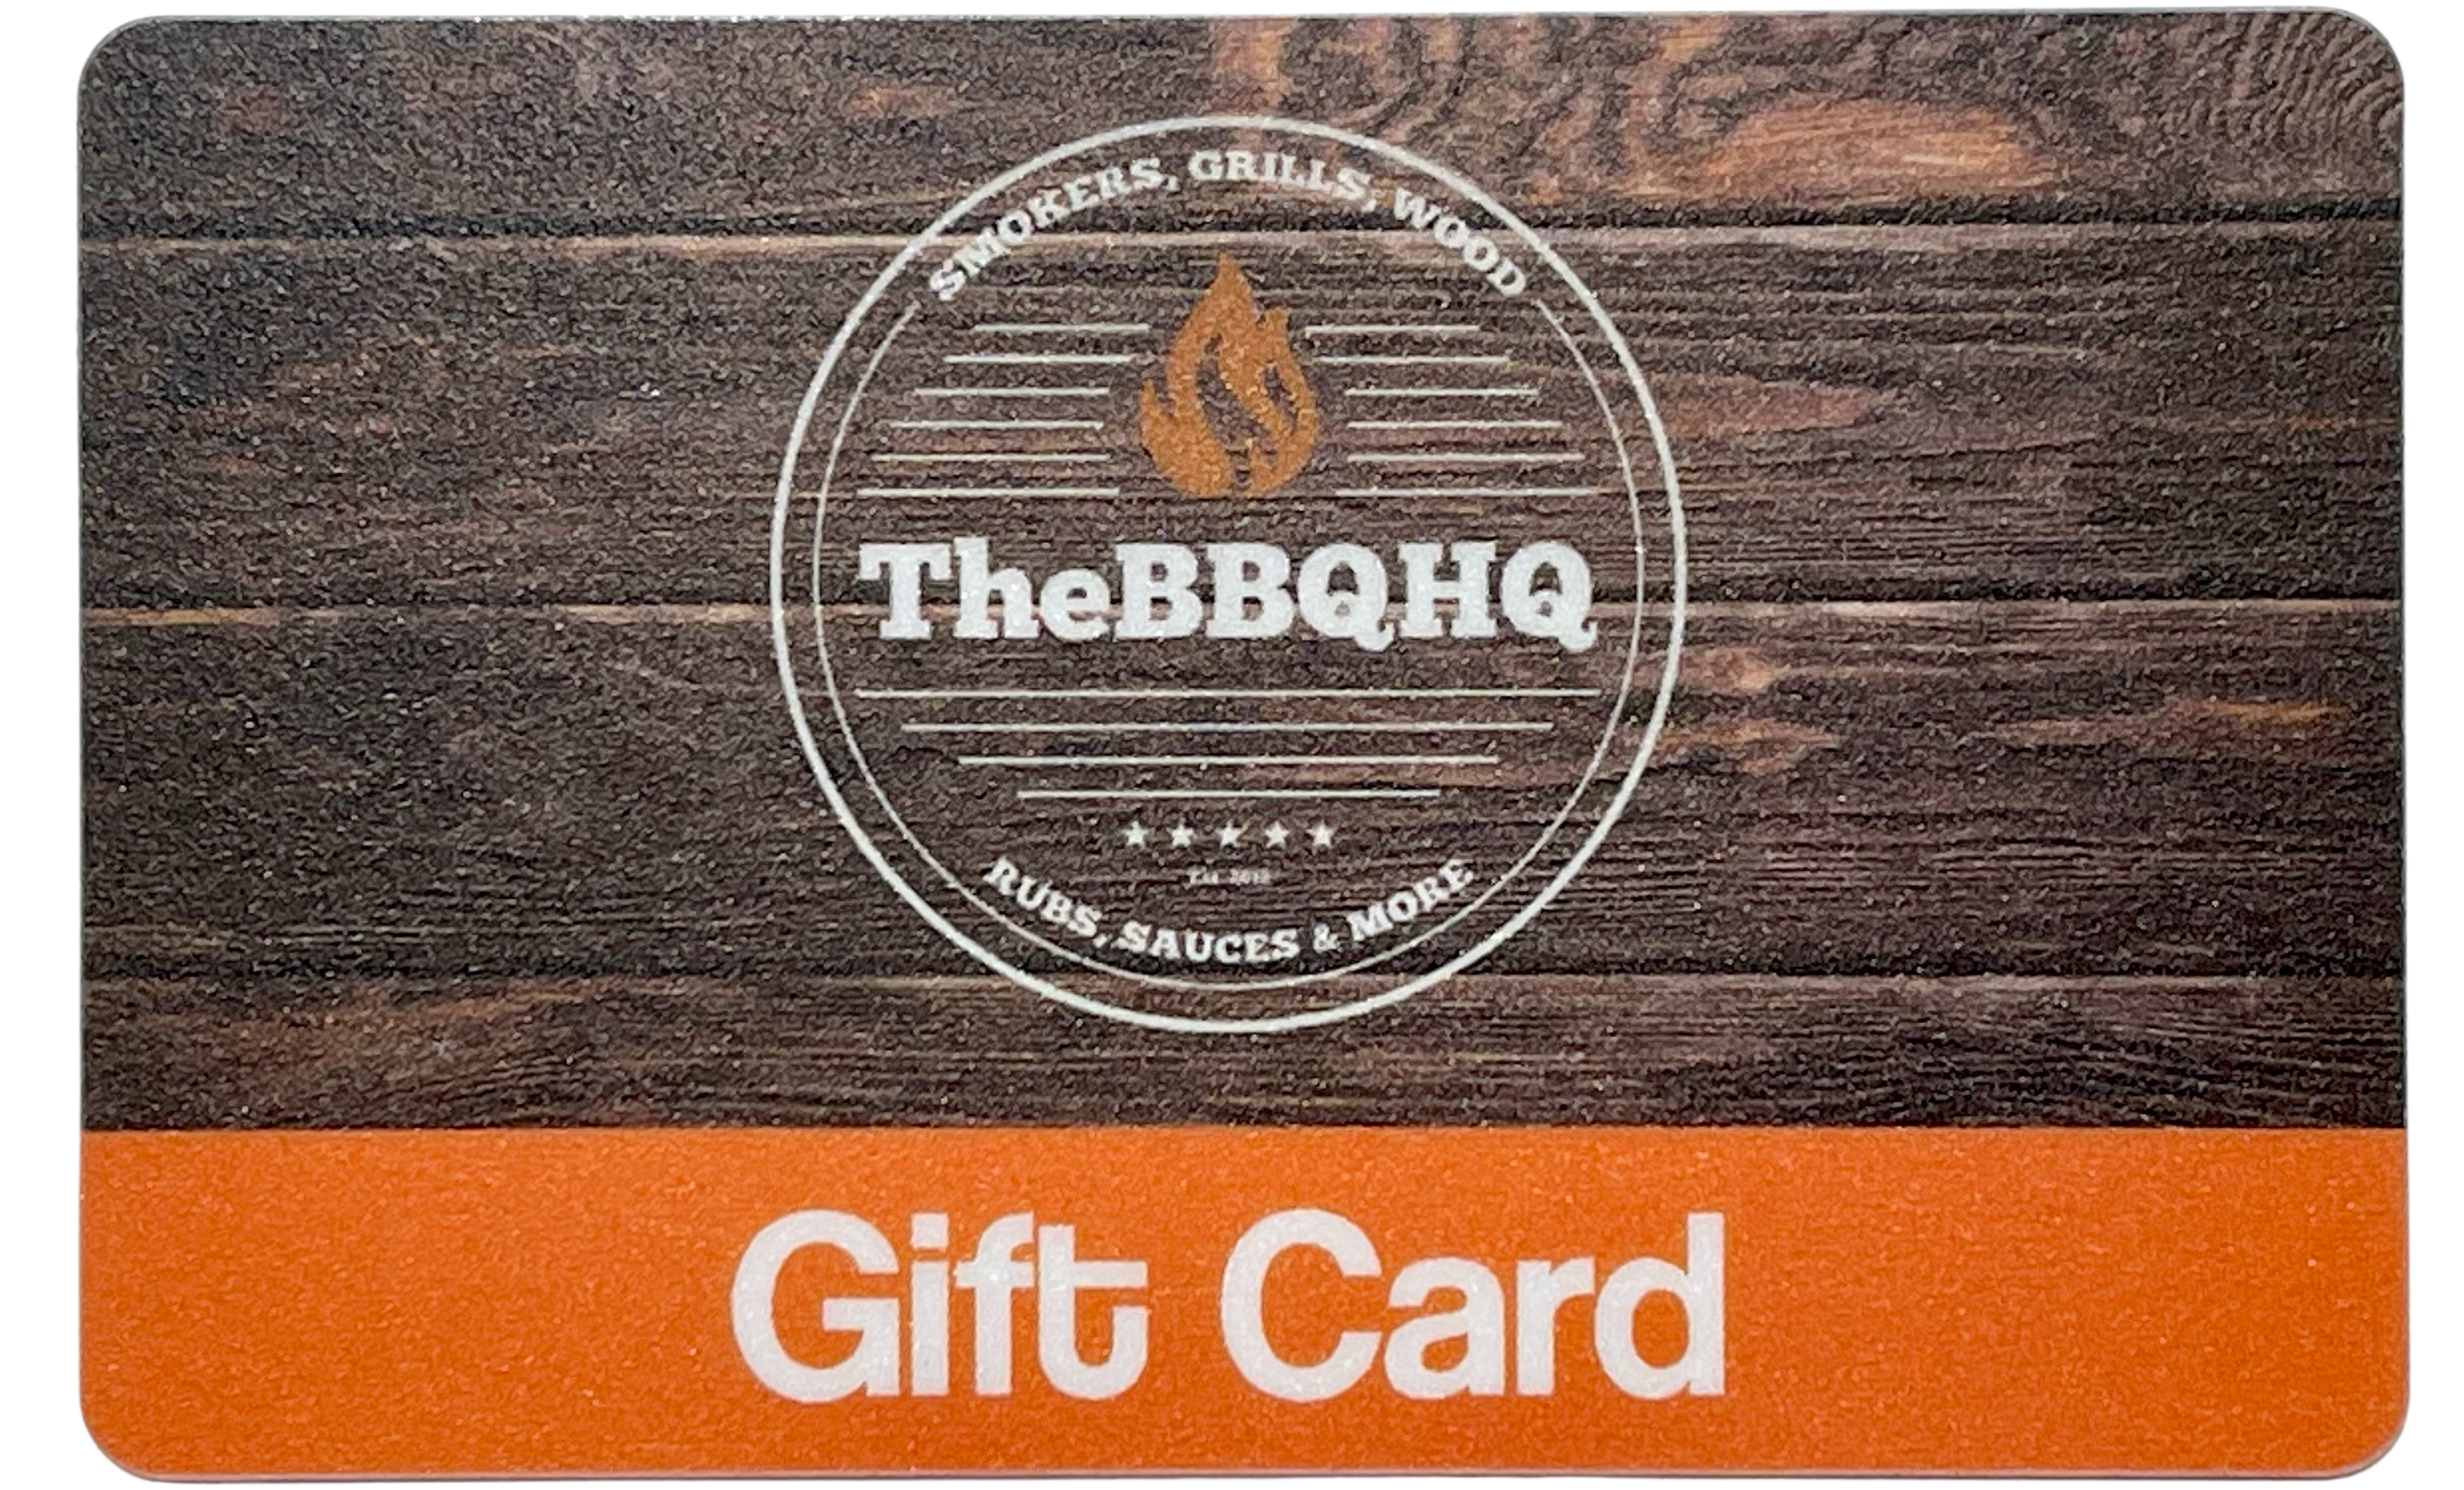 Gift Cards for Grilling, Meat Smoking, BBQ Lovers ($50 gift card